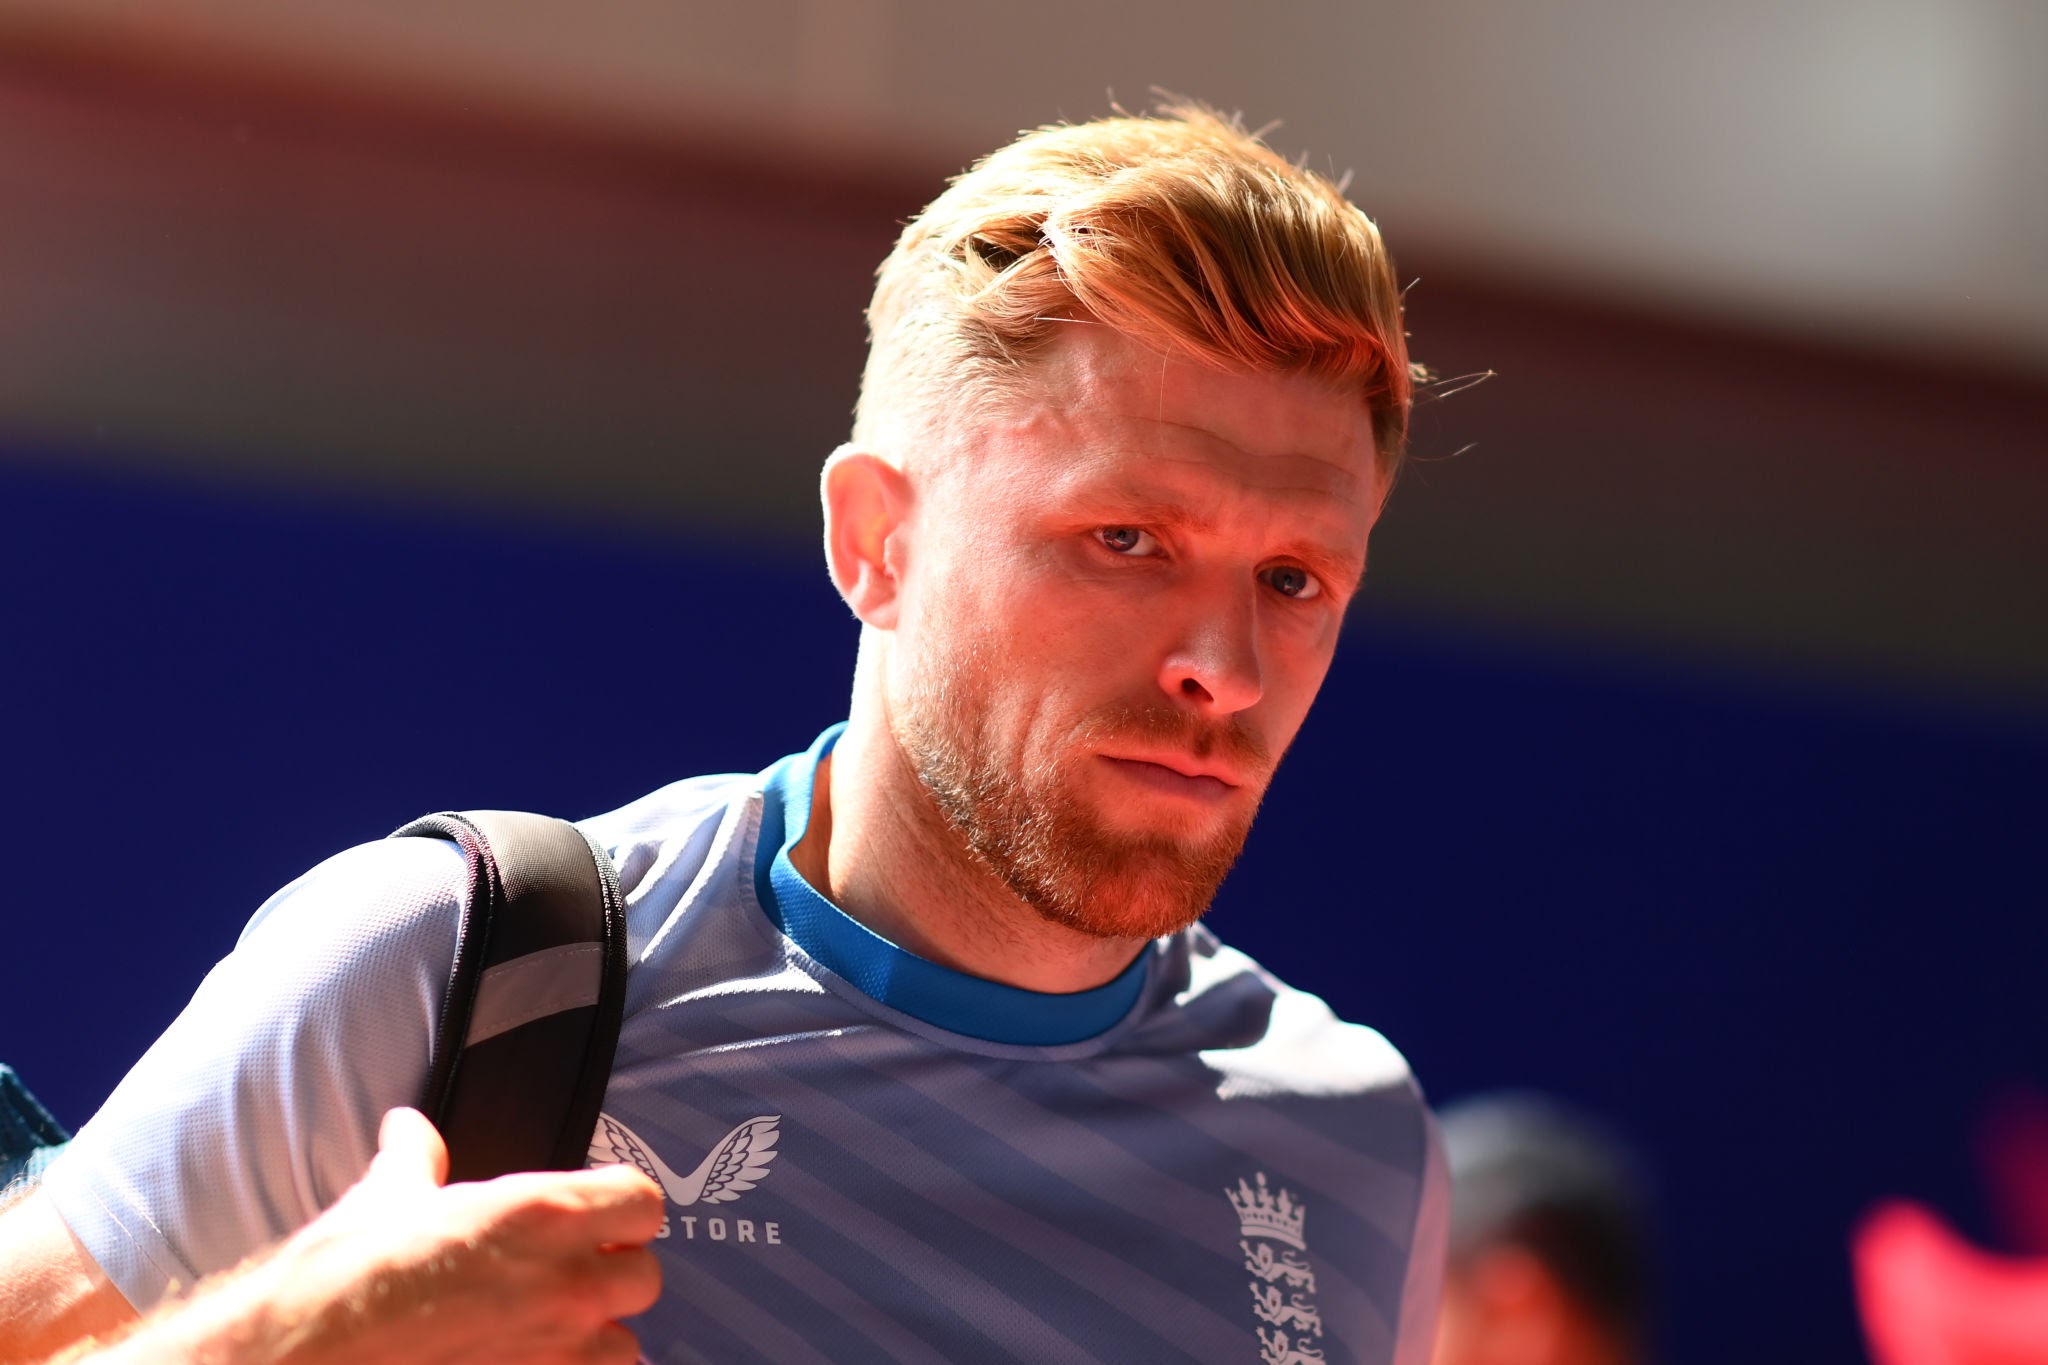 David Willey to Retire From Professional Cricket at the End of the World Cup